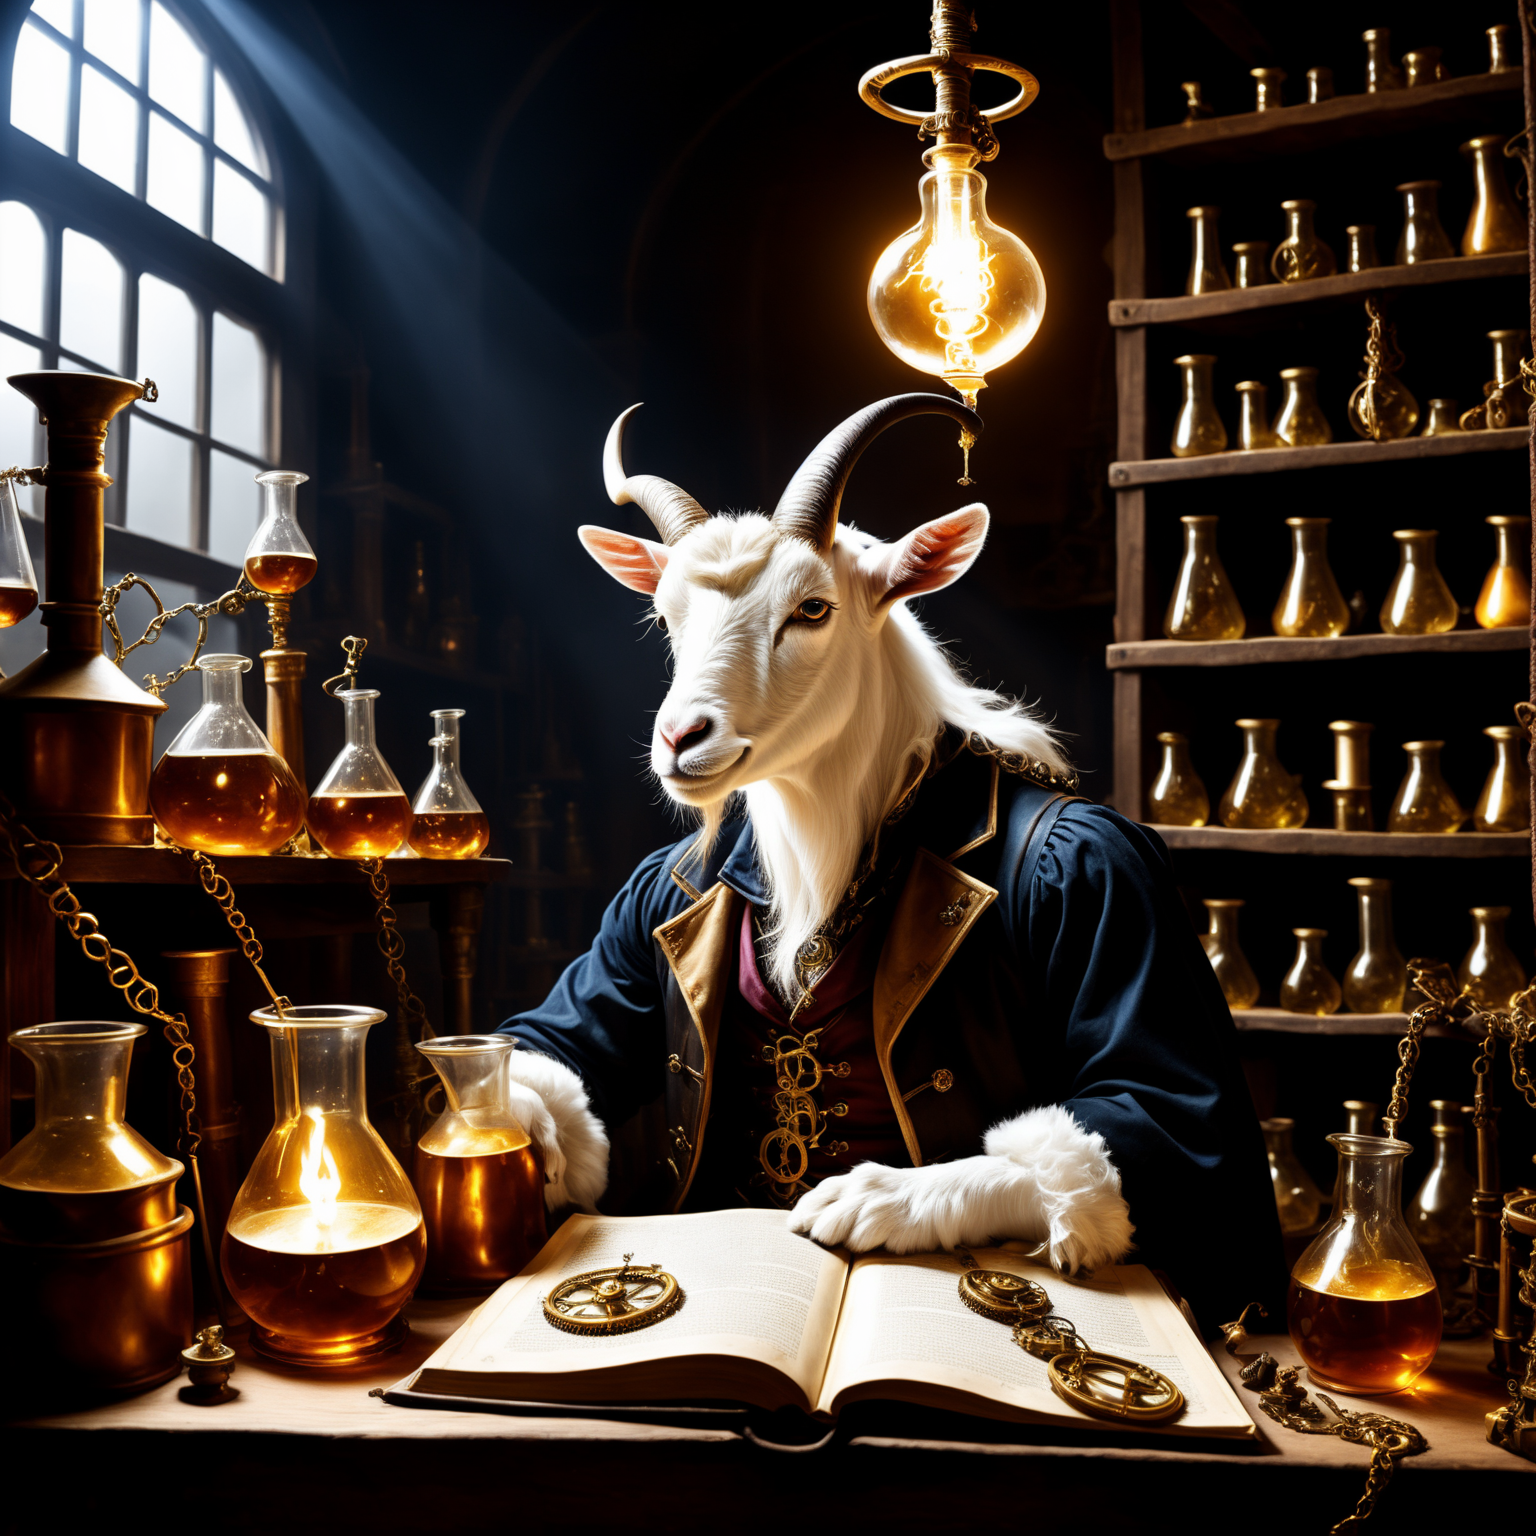 28. An eccentric steampunk alchemist goat tinkering with bubbling beakers and Jacob's ladders amidst piles of arcane tomes...